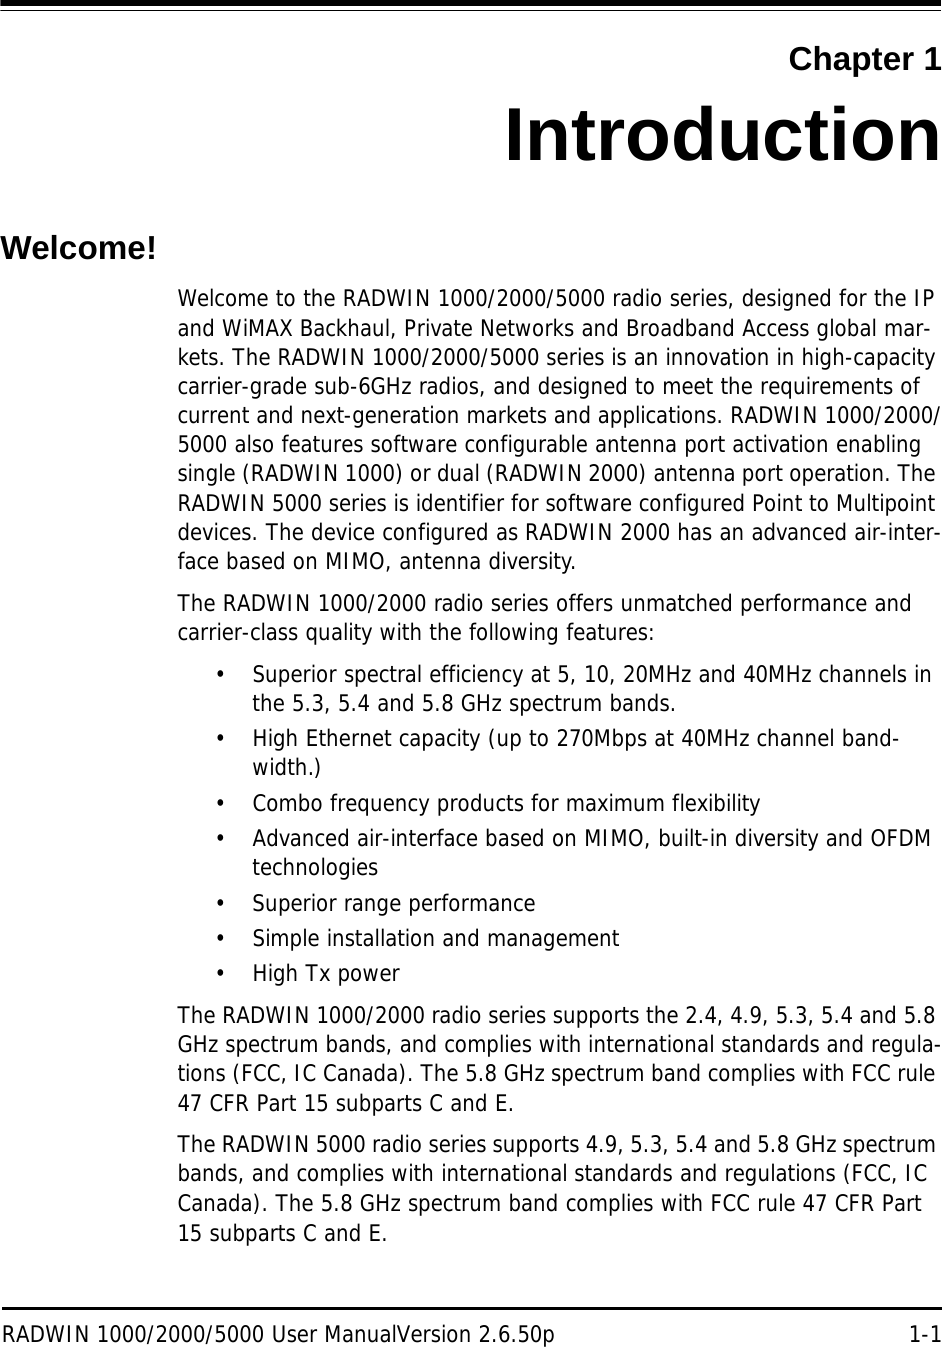 RADWIN 1000/2000/5000 User ManualVersion 2.6.50p 1-1Chapter 1IntroductionWelcome!Welcome to the RADWIN 1000/2000/5000 radio series, designed for the IP and WiMAX Backhaul, Private Networks and Broadband Access global mar-kets. The RADWIN 1000/2000/5000 series is an innovation in high-capacity carrier-grade sub-6GHz radios, and designed to meet the requirements of current and next-generation markets and applications. RADWIN 1000/2000/5000 also features software configurable antenna port activation enabling single (RADWIN 1000) or dual (RADWIN 2000) antenna port operation. The RADWIN 5000 series is identifier for software configured Point to Multipoint devices. The device configured as RADWIN 2000 has an advanced air-inter-face based on MIMO, antenna diversity.The RADWIN 1000/2000 radio series offers unmatched performance and carrier-class quality with the following features:• Superior spectral efficiency at 5, 10, 20MHz and 40MHz channels in the 5.3, 5.4 and 5.8 GHz spectrum bands.• High Ethernet capacity (up to 270Mbps at 40MHz channel band-width.)• Combo frequency products for maximum flexibility • Advanced air-interface based on MIMO, built-in diversity and OFDM technologies• Superior range performance• Simple installation and management•High Tx powerThe RADWIN 1000/2000 radio series supports the 2.4, 4.9, 5.3, 5.4 and 5.8 GHz spectrum bands, and complies with international standards and regula-tions (FCC, IC Canada). The 5.8 GHz spectrum band complies with FCC rule 47 CFR Part 15 subparts C and E.The RADWIN 5000 radio series supports 4.9, 5.3, 5.4 and 5.8 GHz spectrum bands, and complies with international standards and regulations (FCC, IC Canada). The 5.8 GHz spectrum band complies with FCC rule 47 CFR Part 15 subparts C and E.